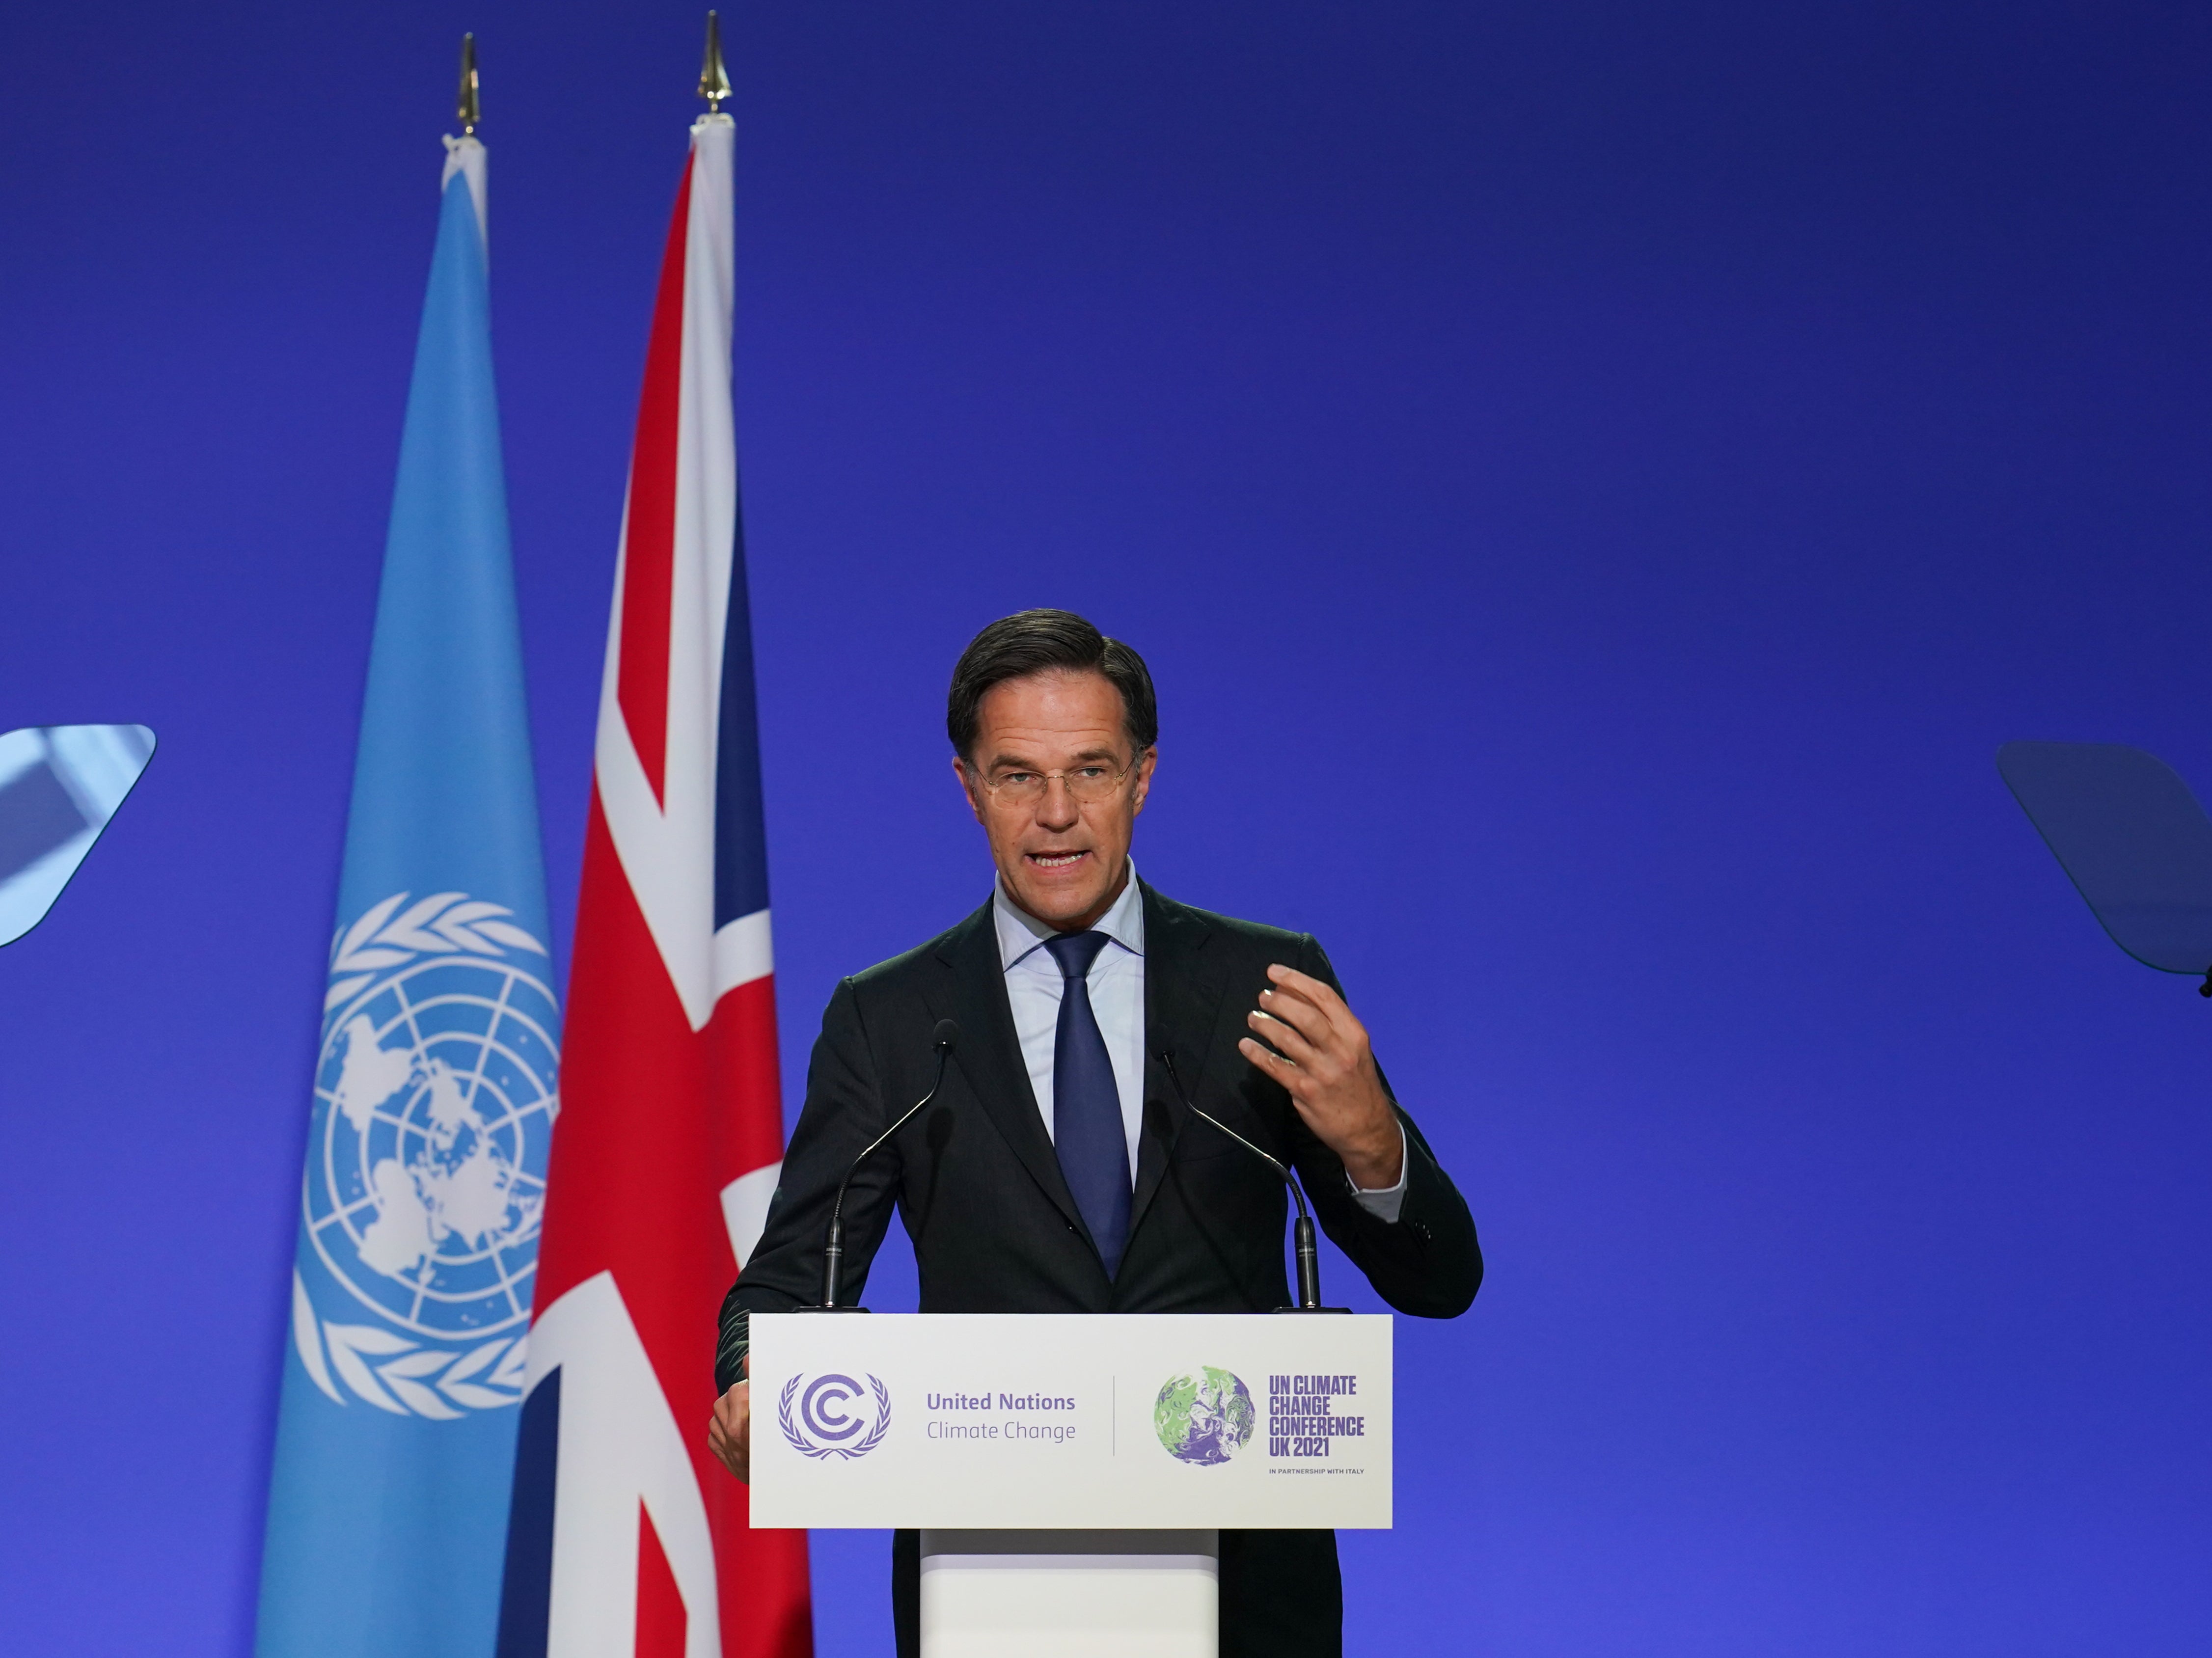 Rutte is currently attending the UN Cop26 climate summit in Glasgow